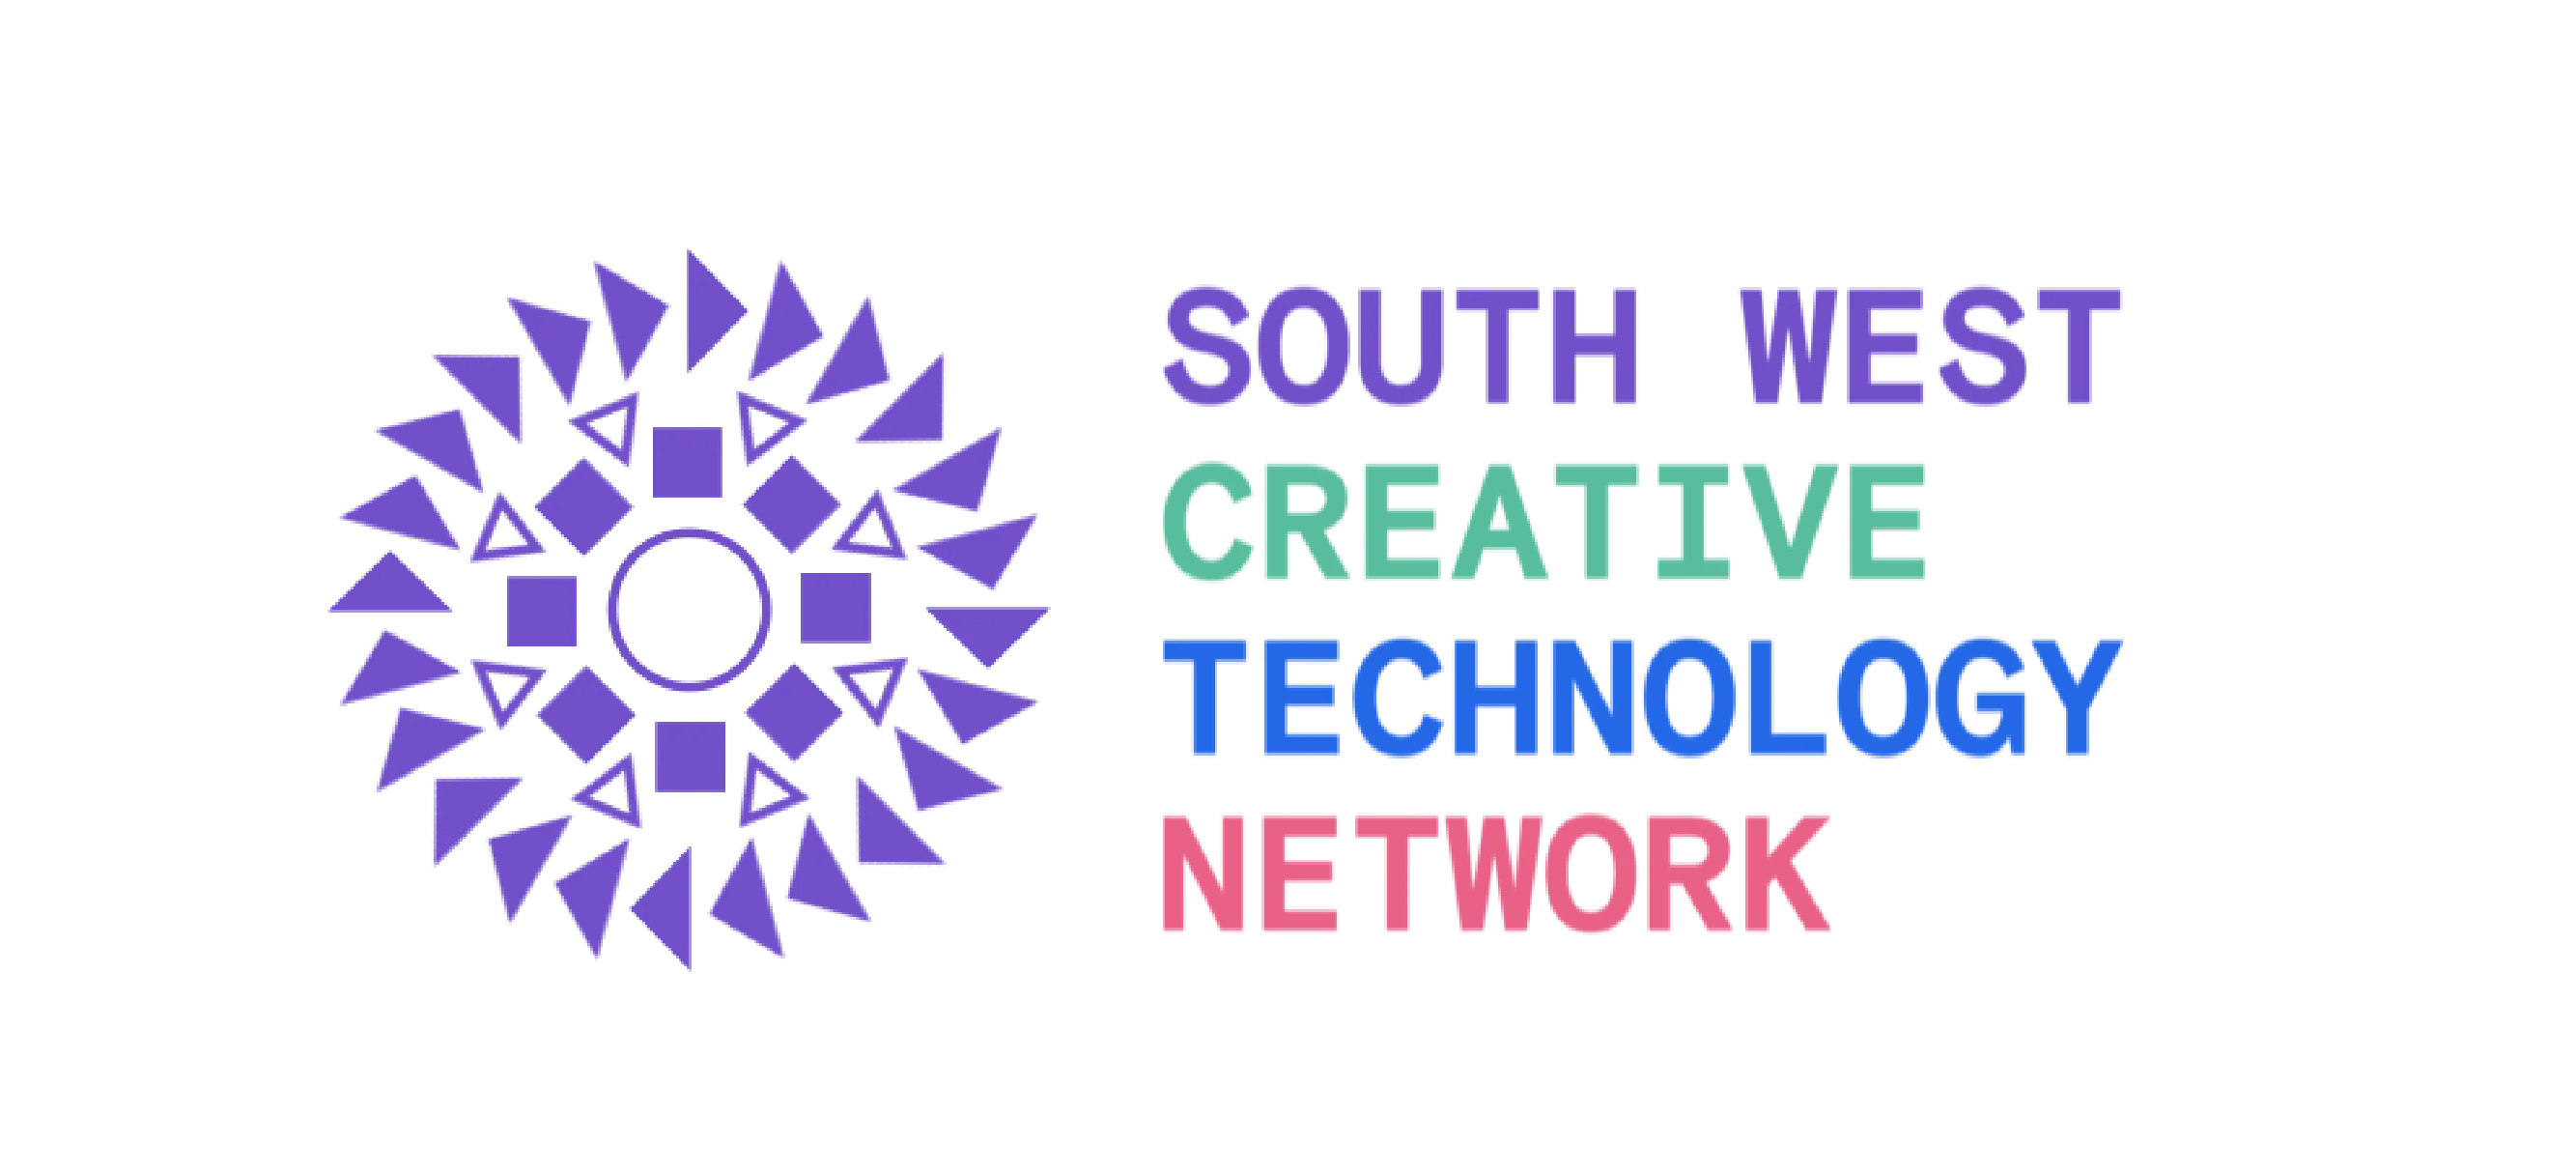 South West Creative Technology Network